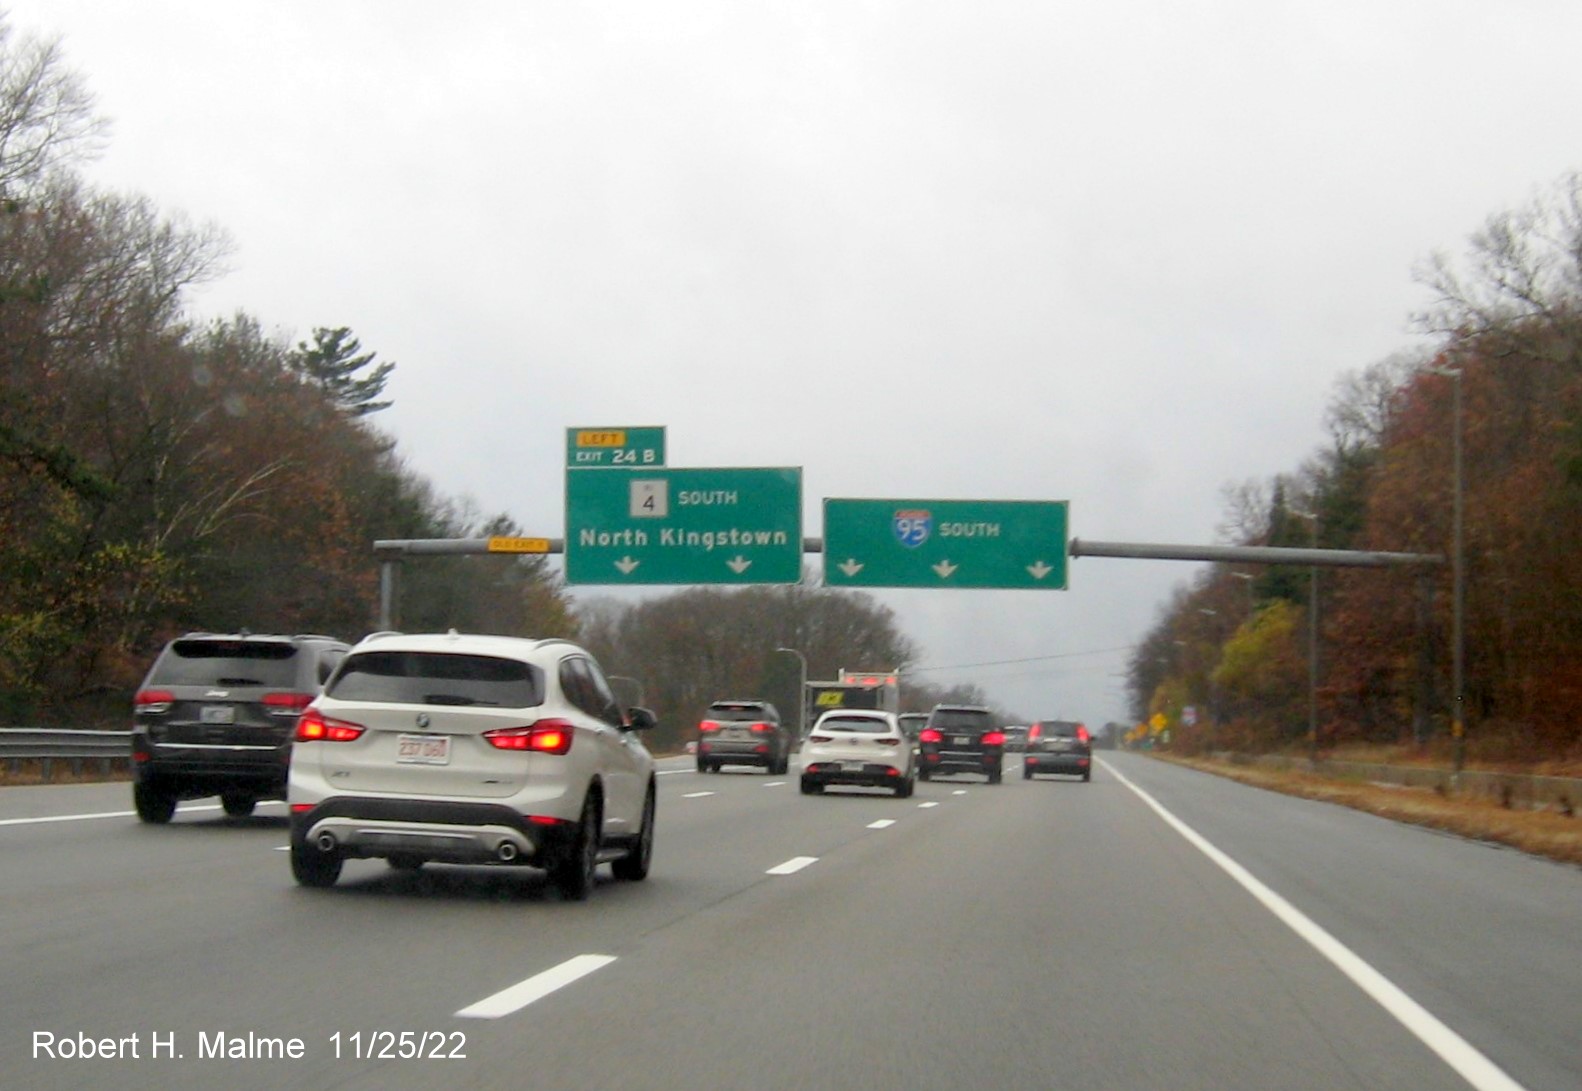 Image of overhead ramp sign for RI 4 South exit with new milepost based exit number and yellow Old Exit 9 advisory sign over exit tab on I-95 South in Warwick, November 2022